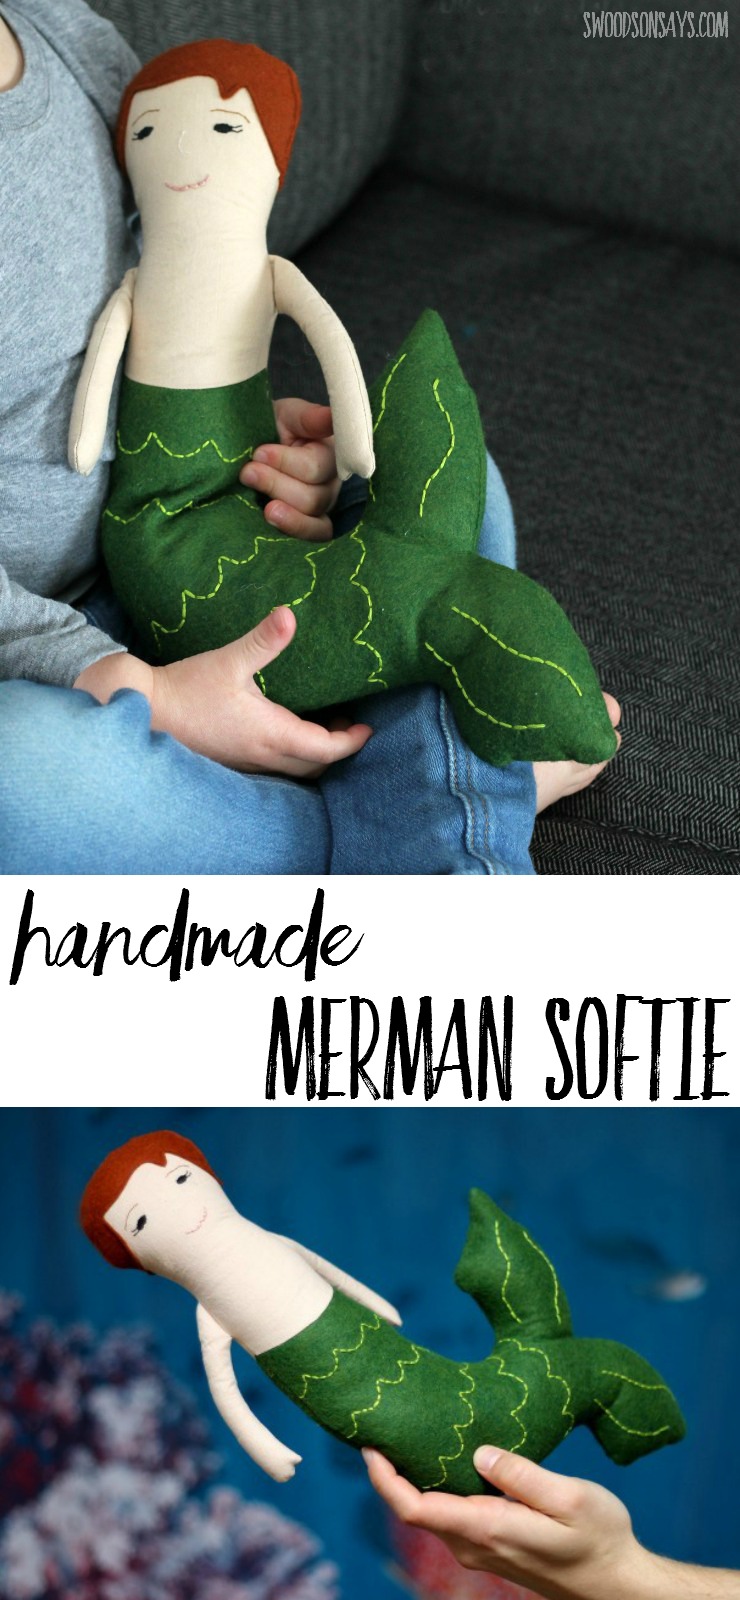 A boy mermaid, better known as a merman, in doll form! I loved sewing this handmade toy for my son - sewing things for boys can be a little trickier but no less fun.